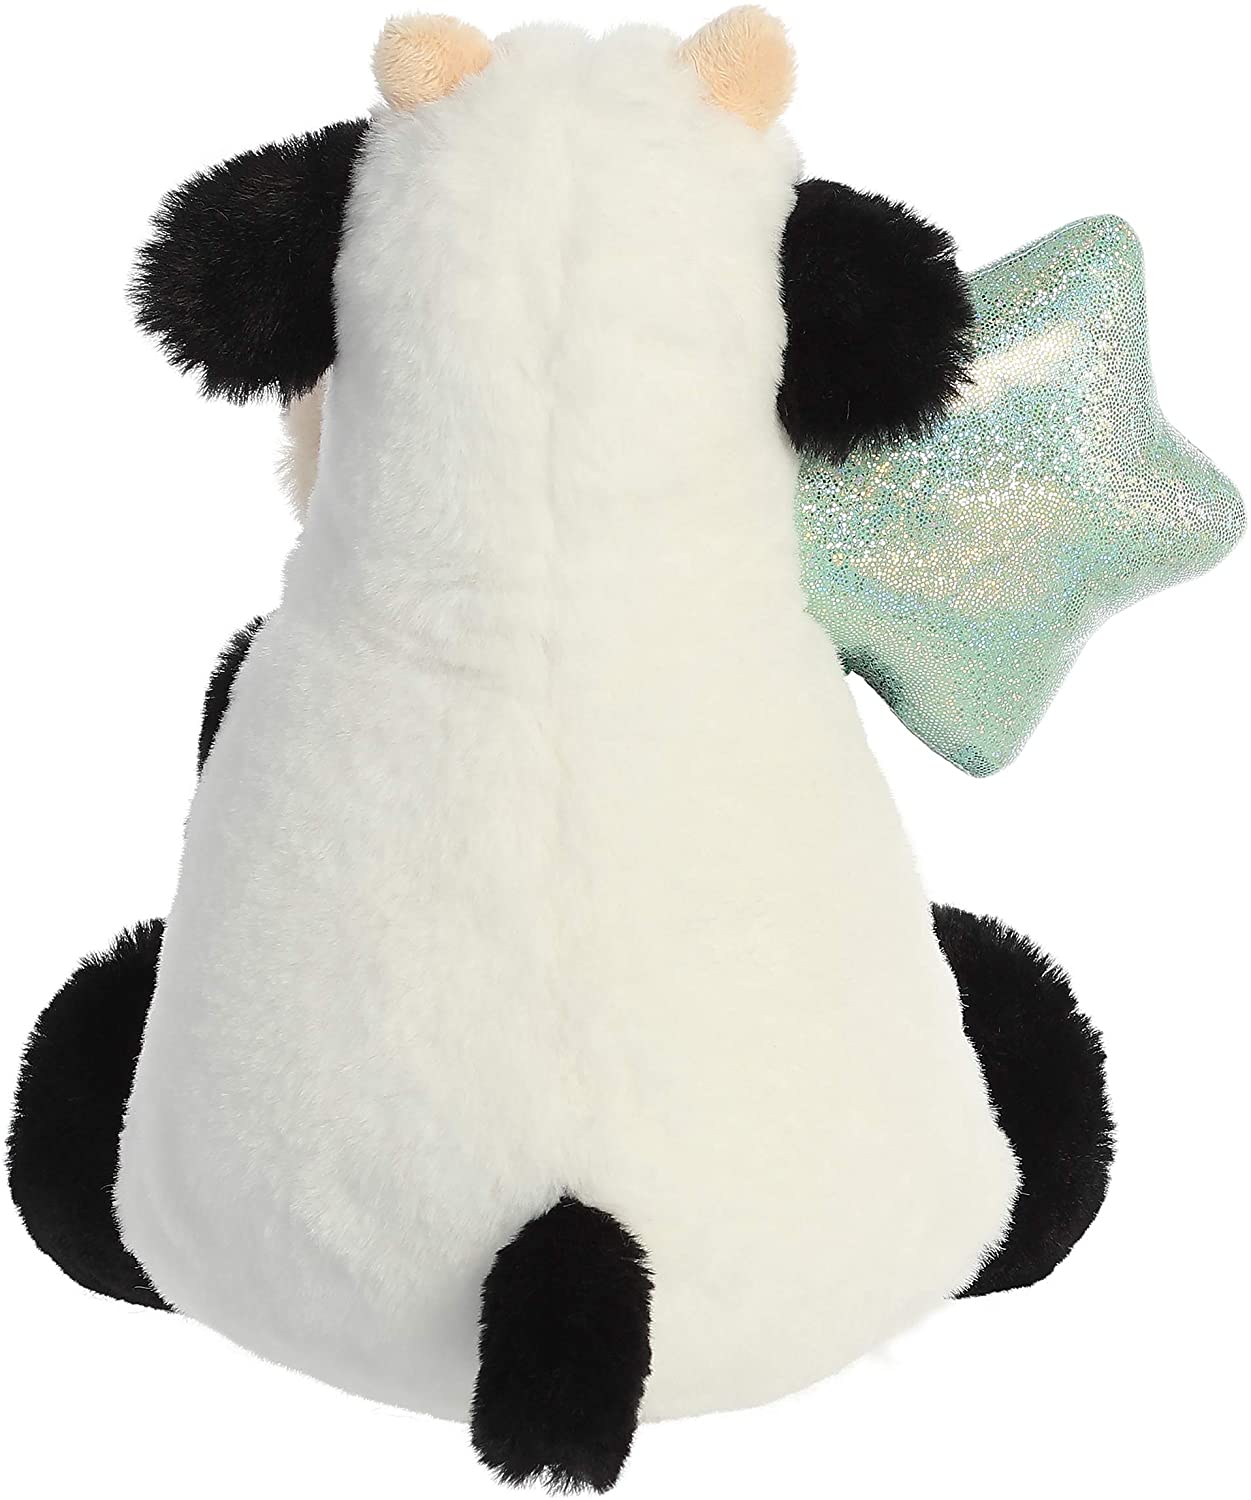 Happy Cow. 11 inches in size. High quality materials make for a soft and fluffy touch. Quality materials for a soft cuddling experience "Congrats" Embroidered in teal detailing. Bean-filled to sit in an upright position.